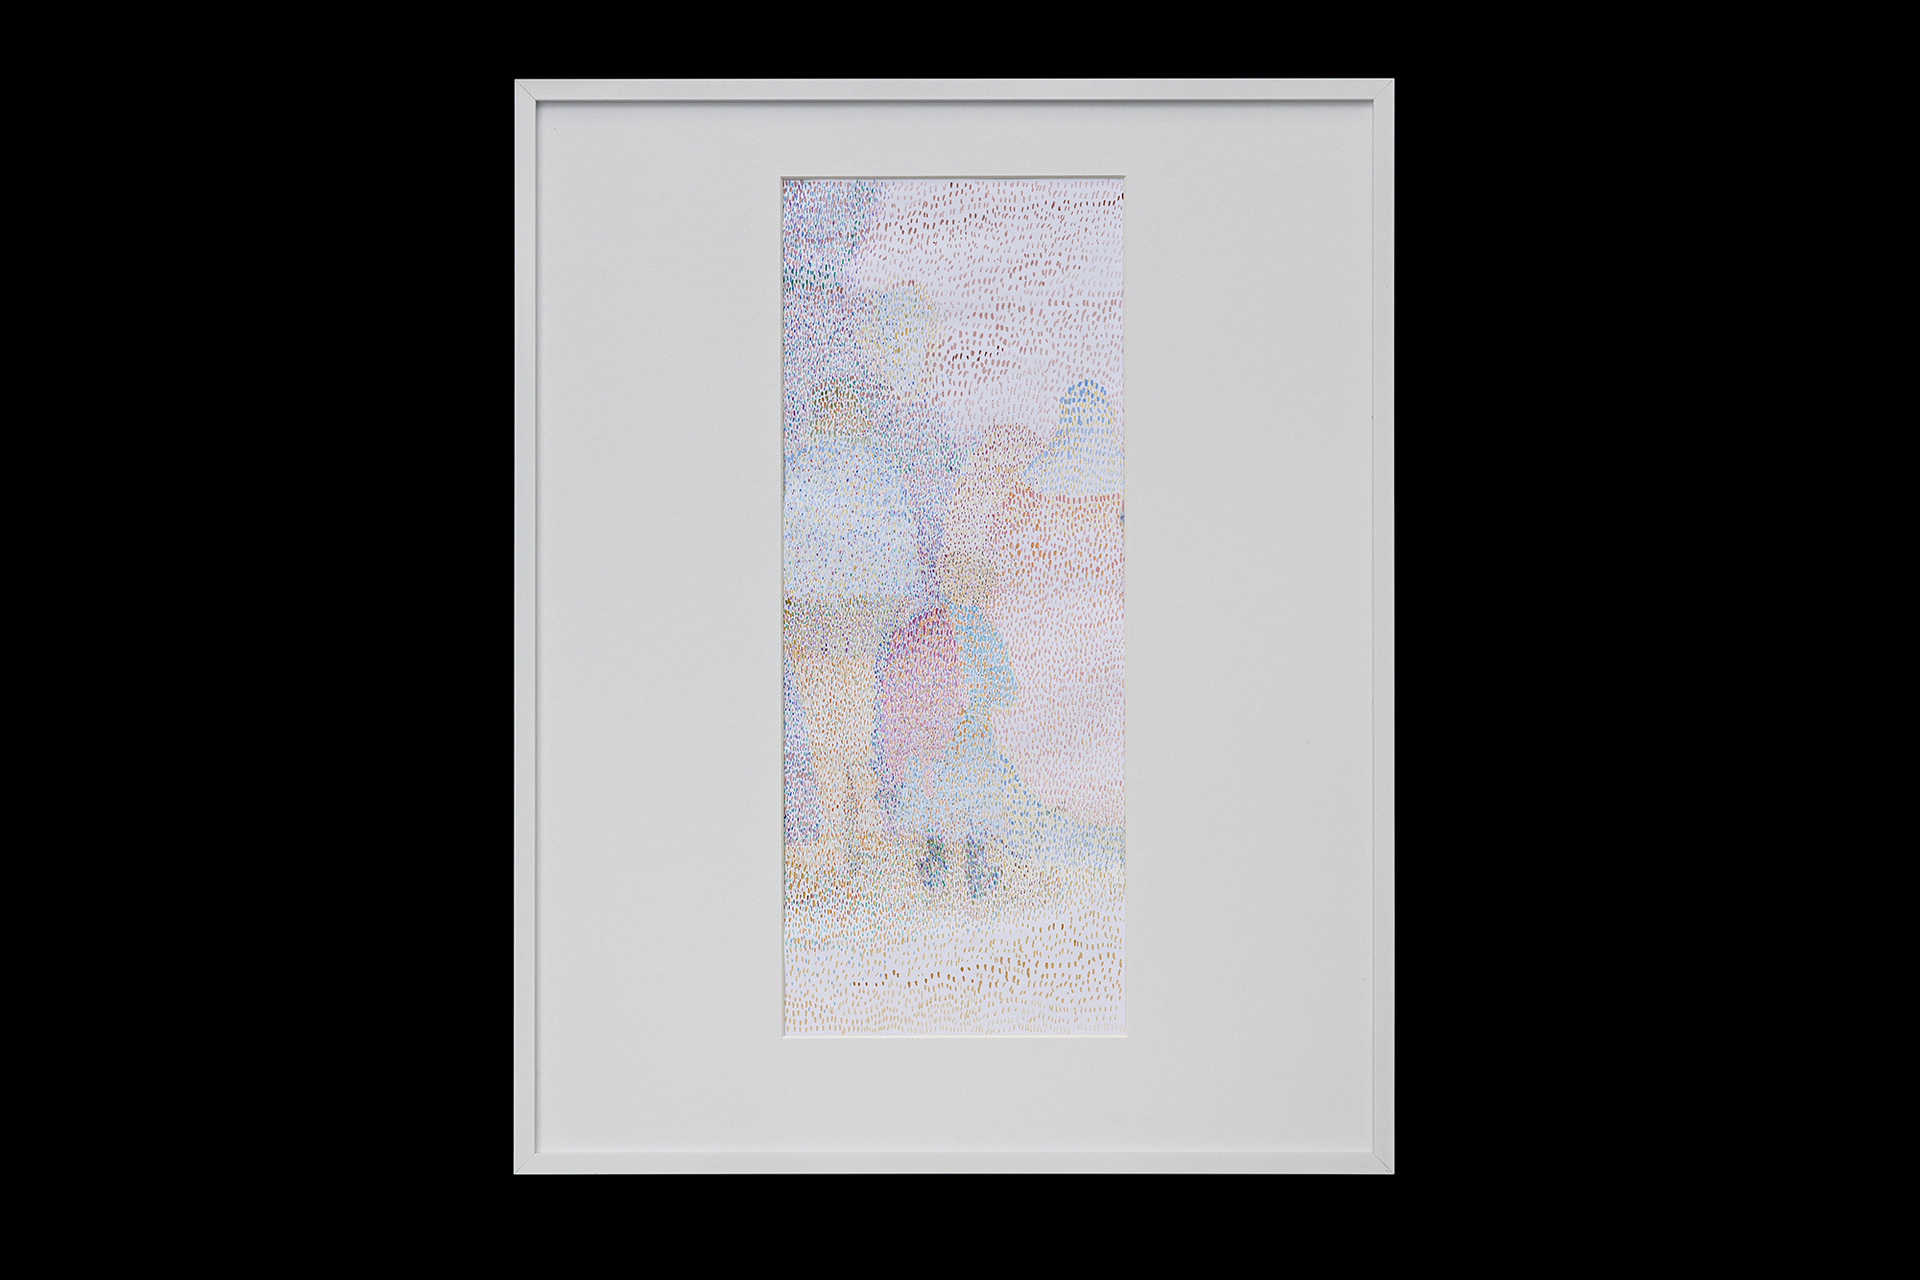 Annaliisa Krage, Untitled (Imagined picture), 2021, Pencil, watercolour on paper, 40 x 50 cm (frame)